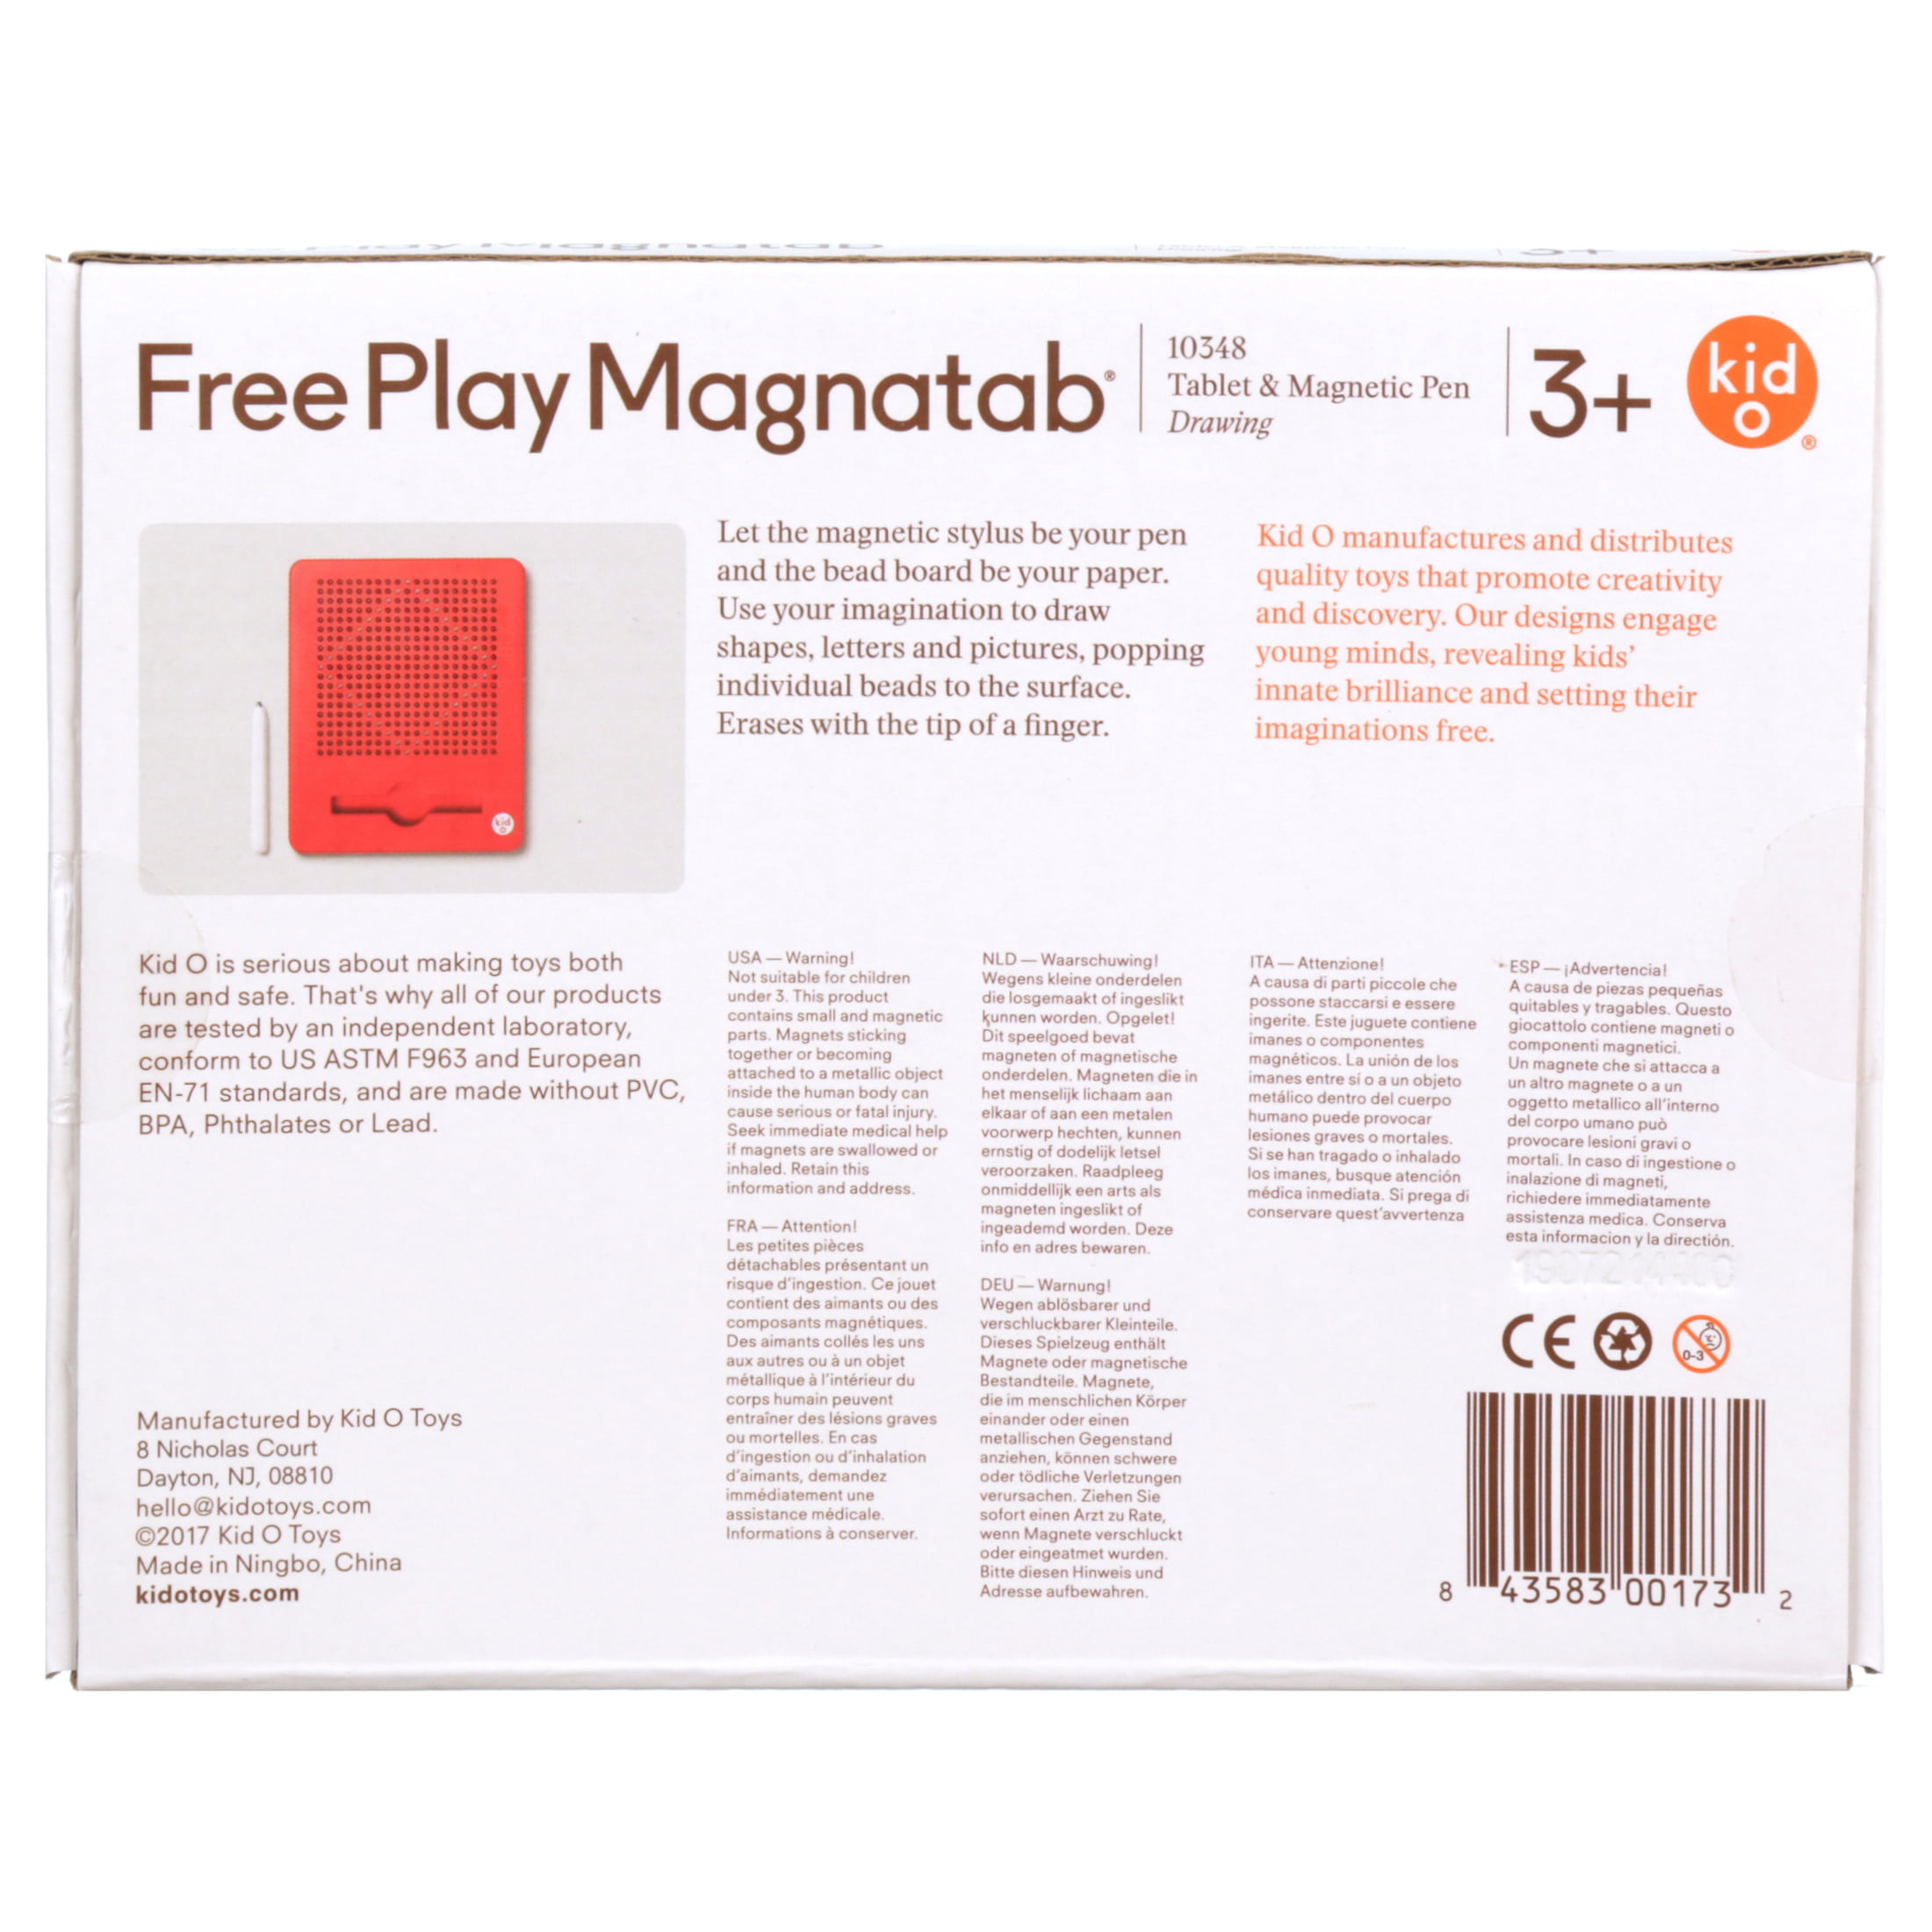 Brand New in Box Kid O Free Play Magnatab Tablet & Magnetic Pen Drawing Ages 3 